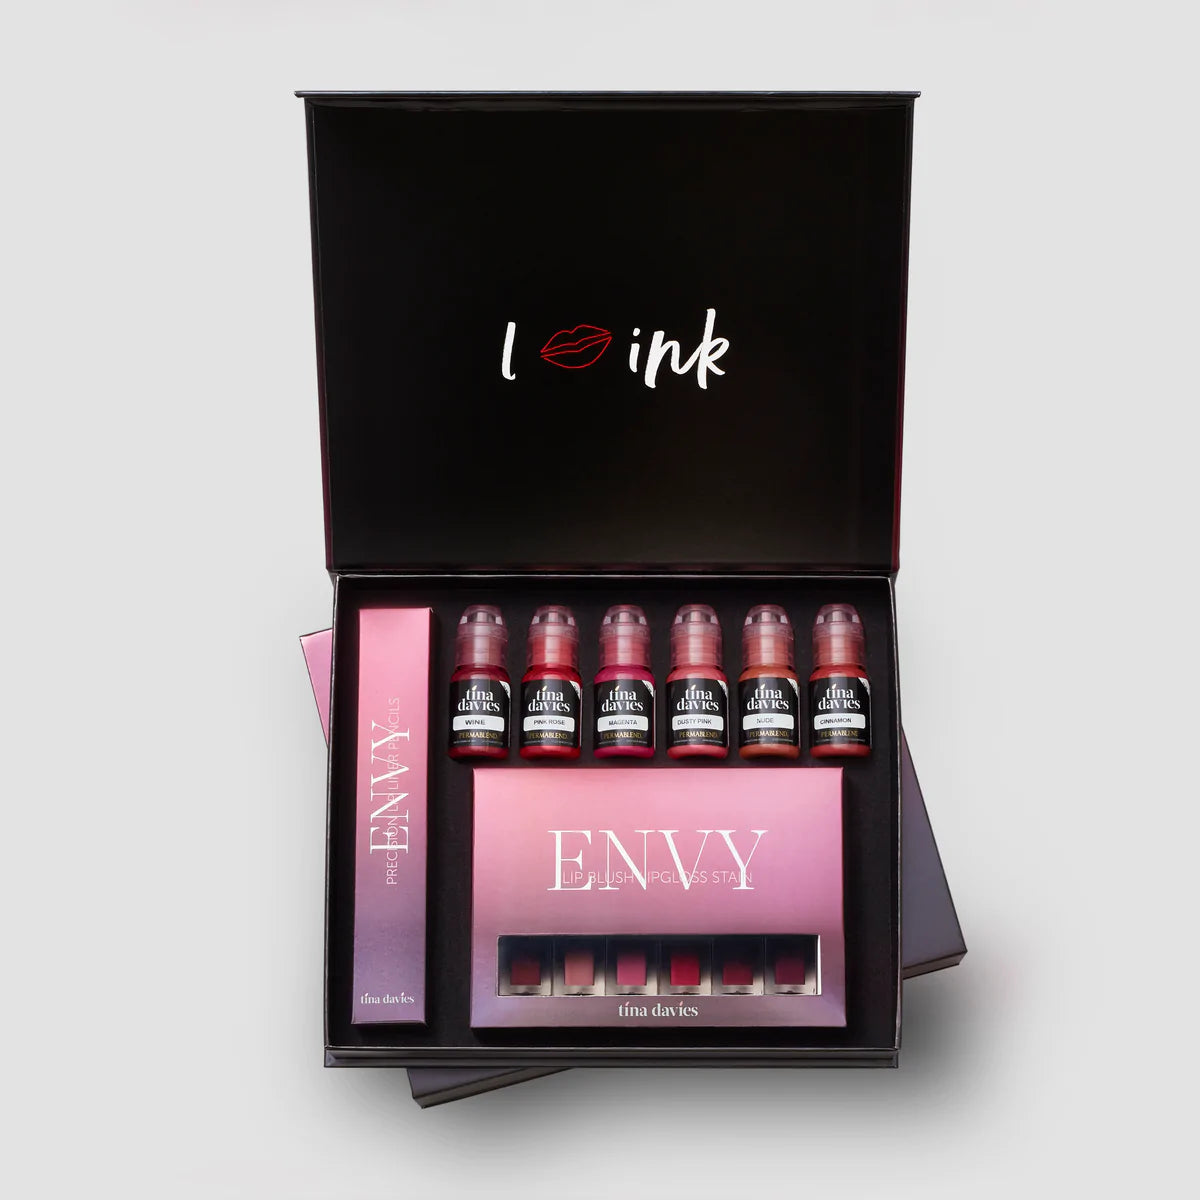 Tina davies ENVY lip collection in a black box. consists of 6 pigment bottles along the top row of the box, a long narrow box to the left and a rectangular box at the bottom with 6 matching lip gloss colors in them